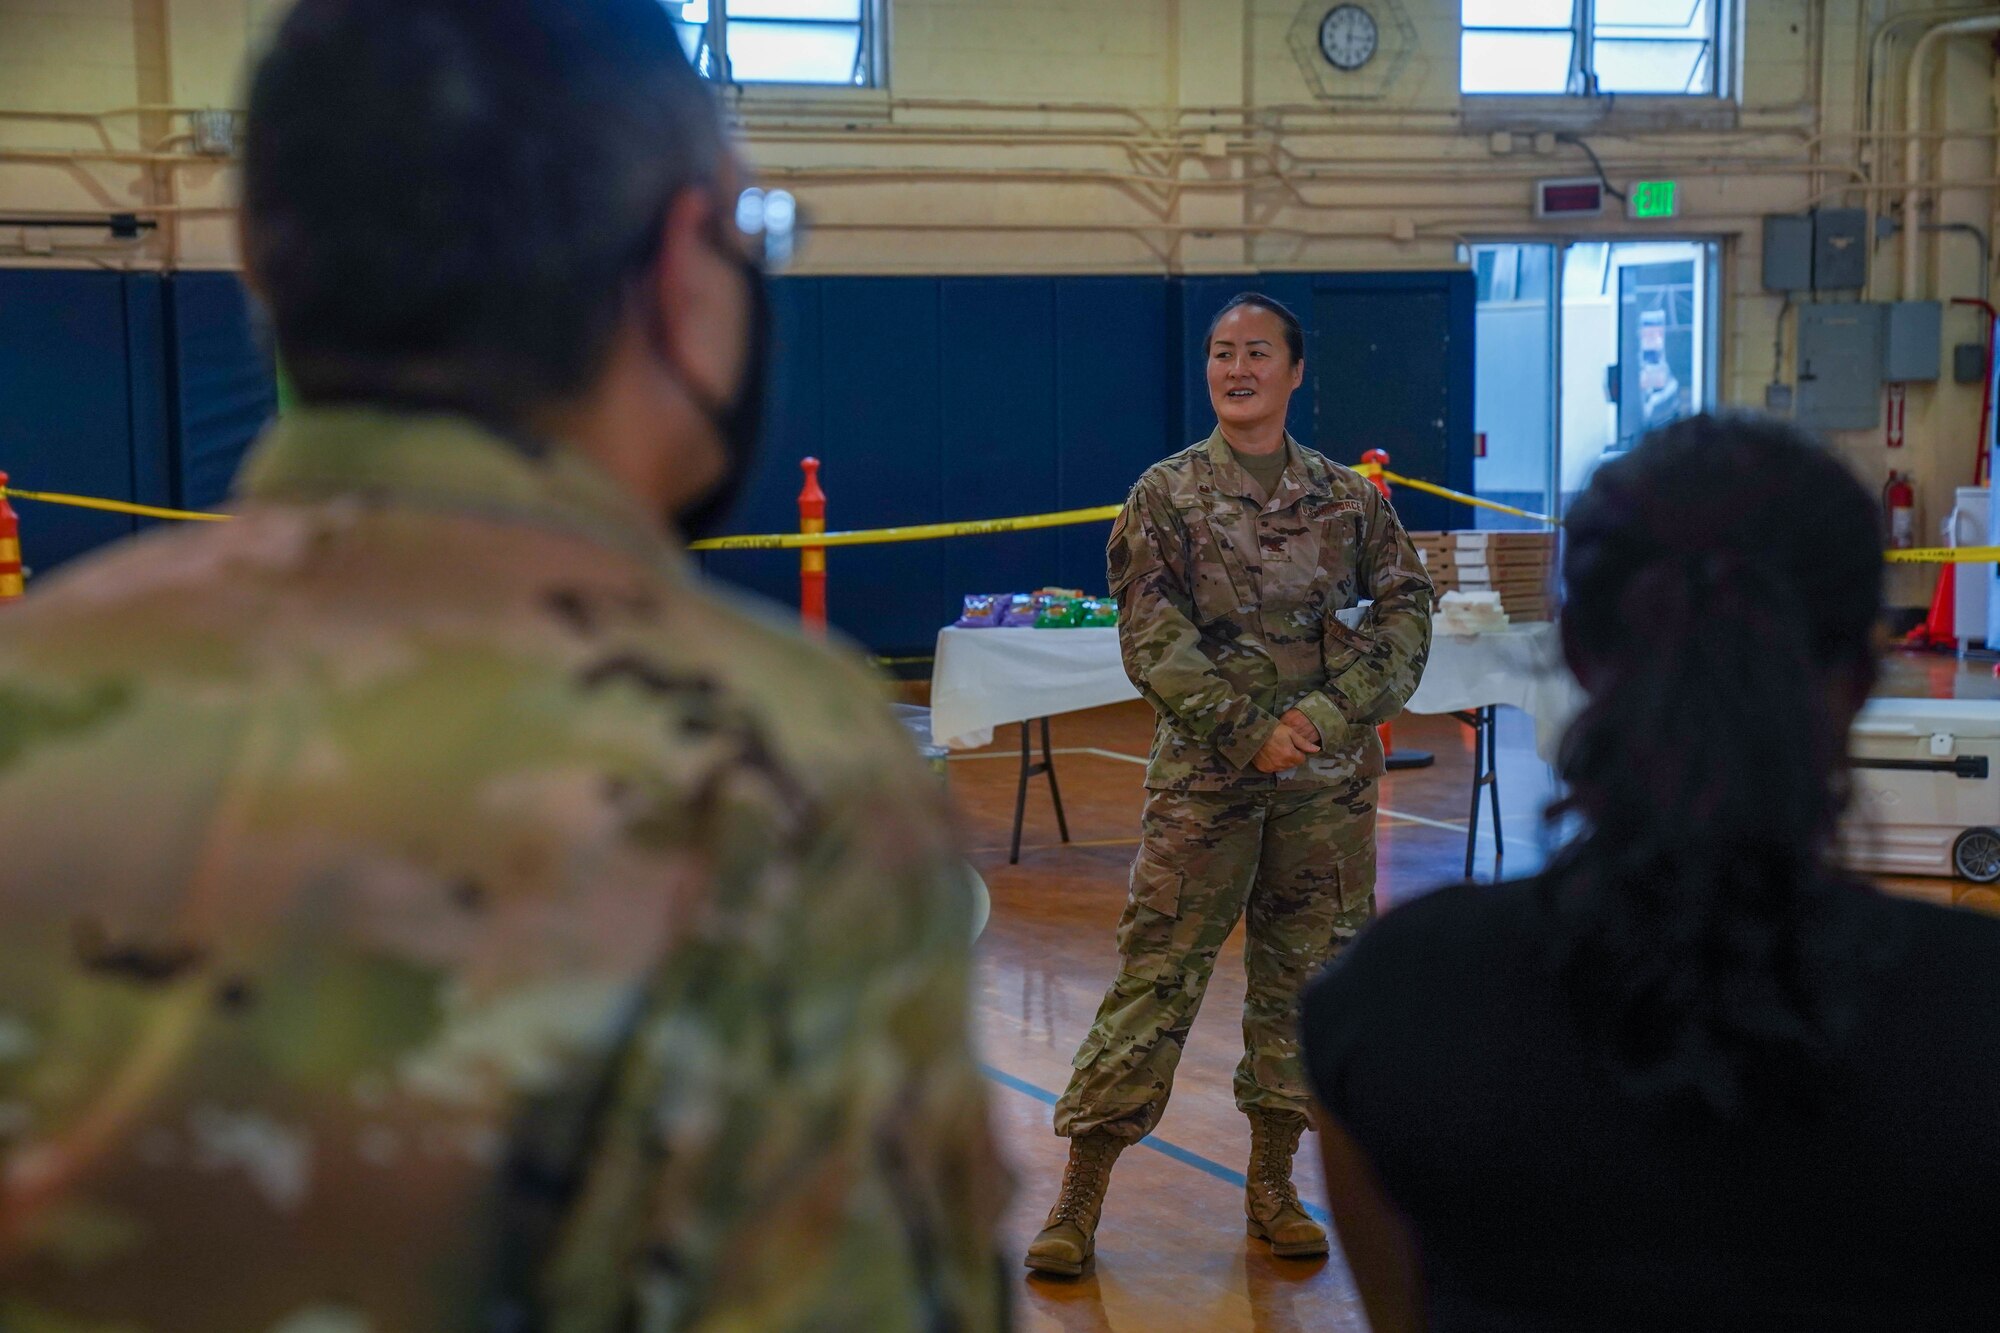 Col. Stephanie Ku, 15th Medical Group commander, briefs Airmen from the 15th MDG before the start of the 30th mass vaccination in the Hickam Memorial Fitness Center at Joint Base Pearl Harbor-Hickam, Hawaii, Nov. 30, 2021. 15th MDG administered more than 19,000 vaccines to Active Duty Airmen and Guardians, contractors, retirees and dependents. (U.S. Air Force photo by Airman 1st Class Makensie Cooper)